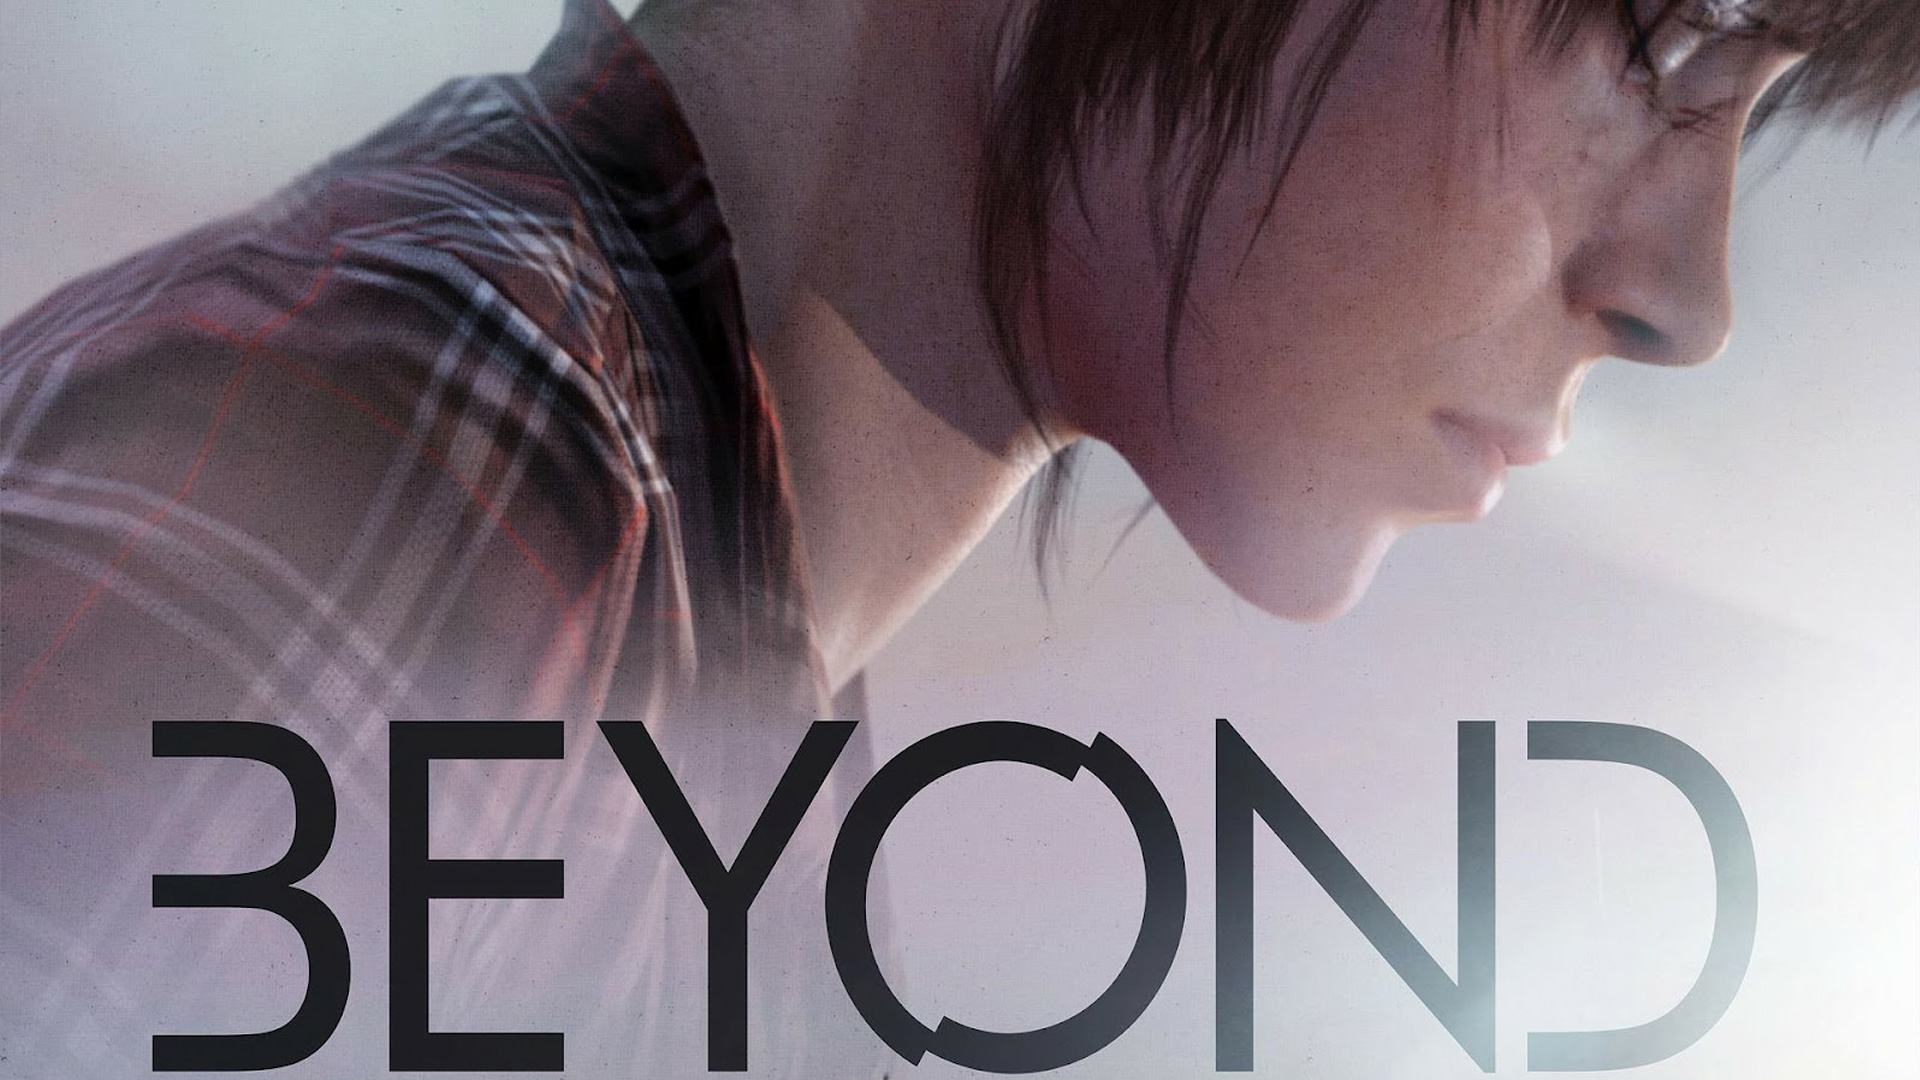 beyond-two-souls-wallpapers-1080p